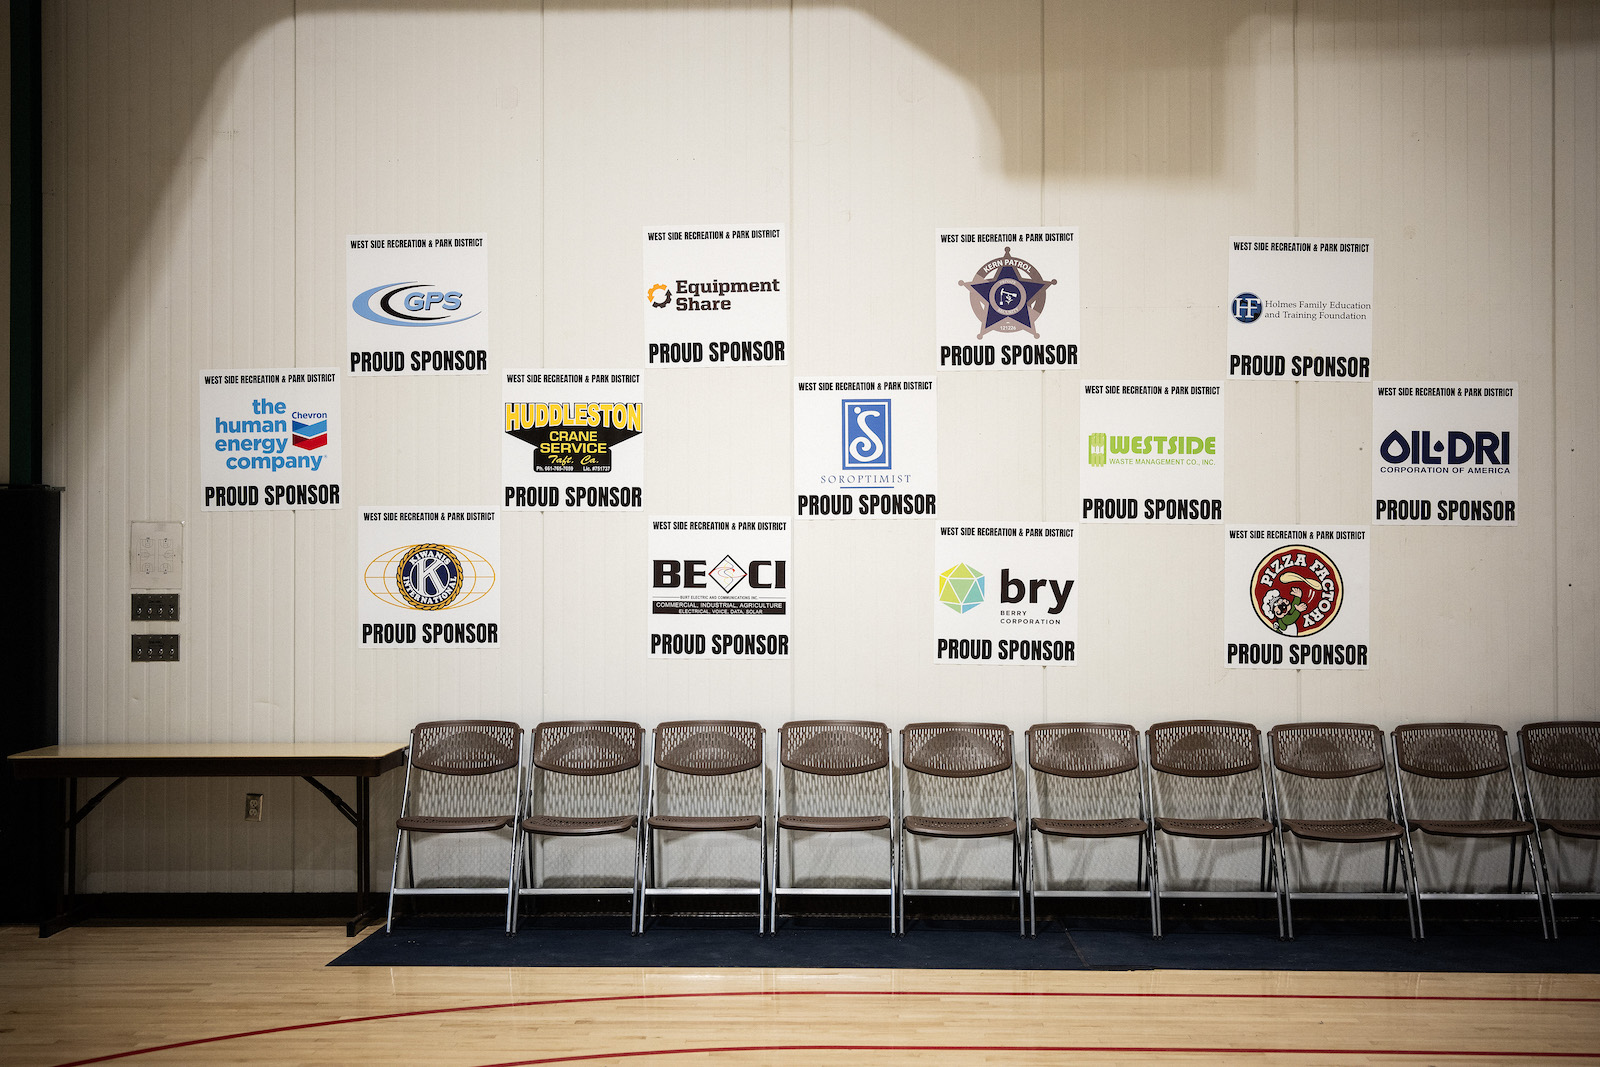 A row of chairs in front of a wall with many oil and gas company logos on it